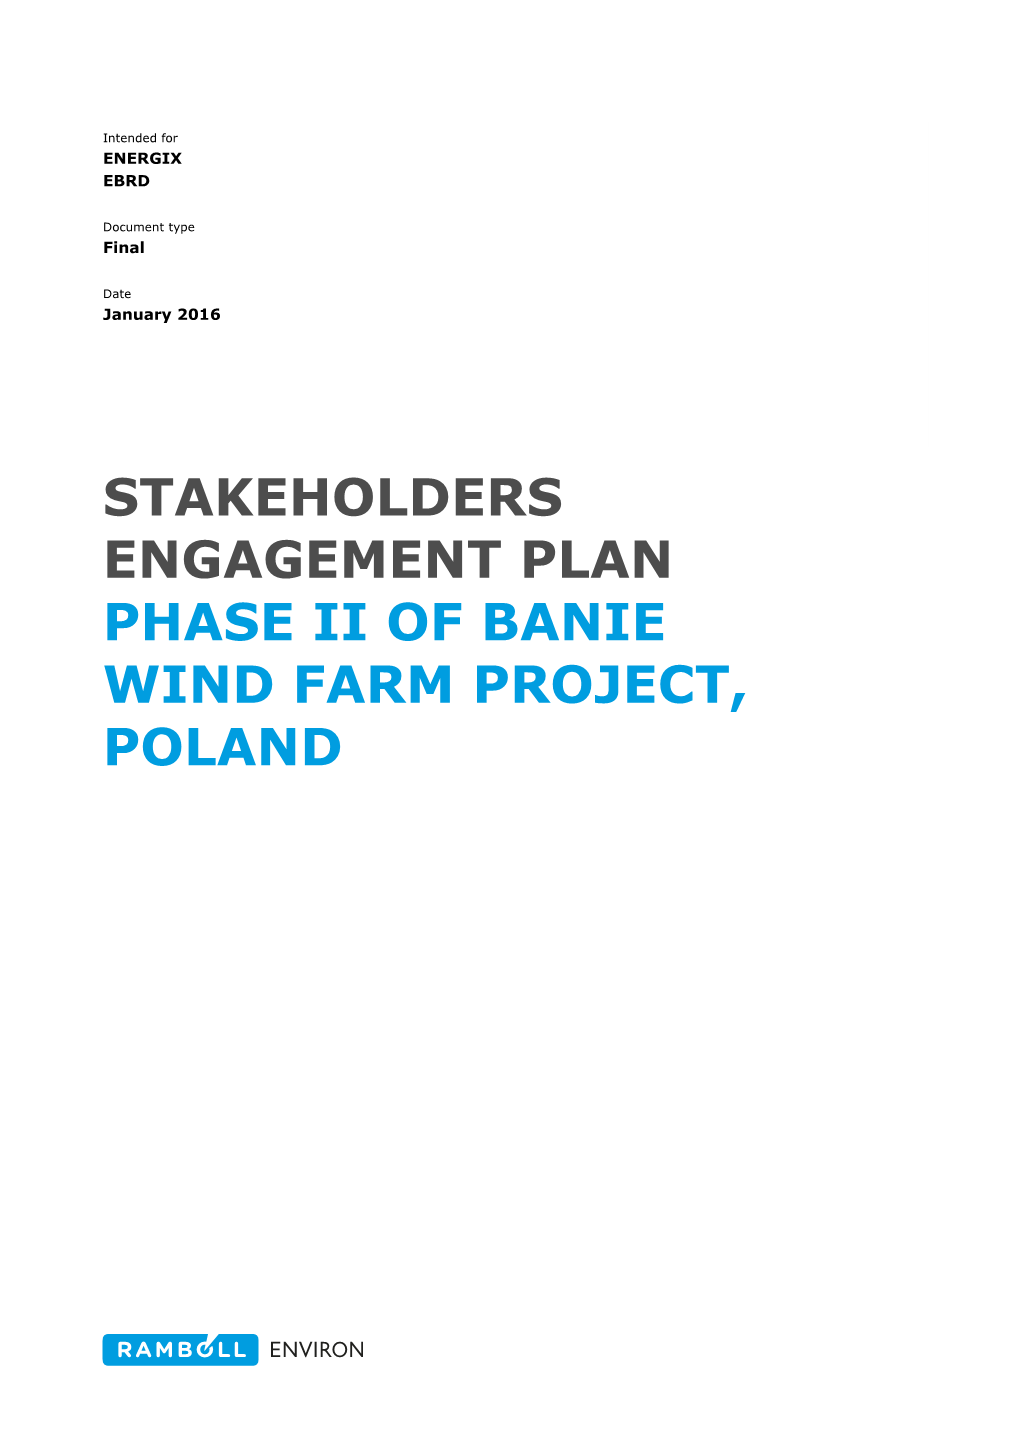 Stakeholders Engagement Plan Phase Ii of Banie Wind Farm Project, Poland